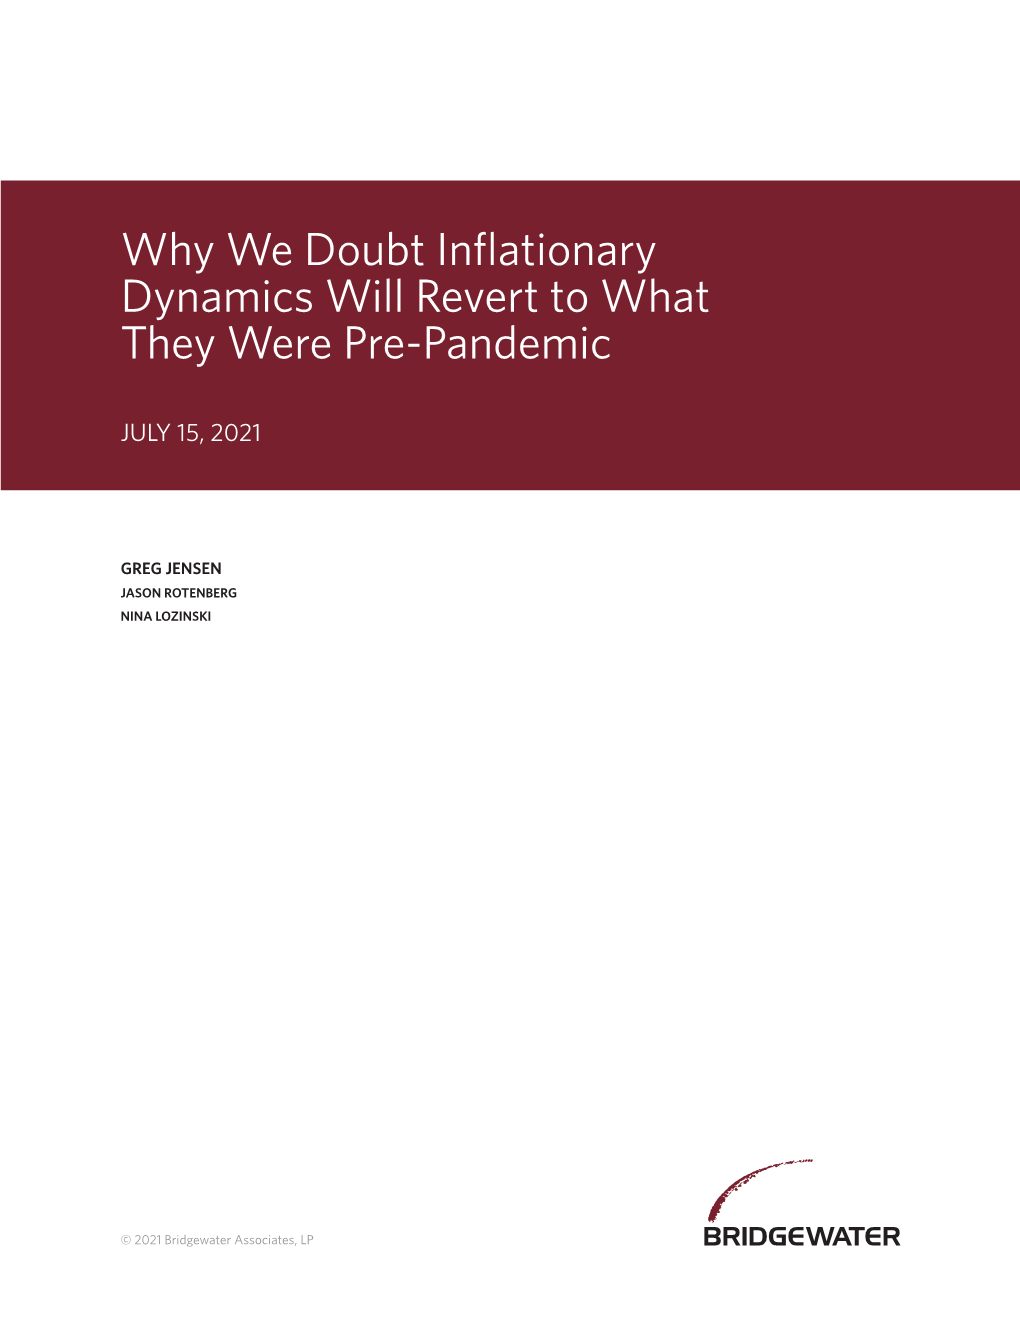 Why We Doubt Inflationary Dynamics Will Revert to What They Were Pre-Pandemic